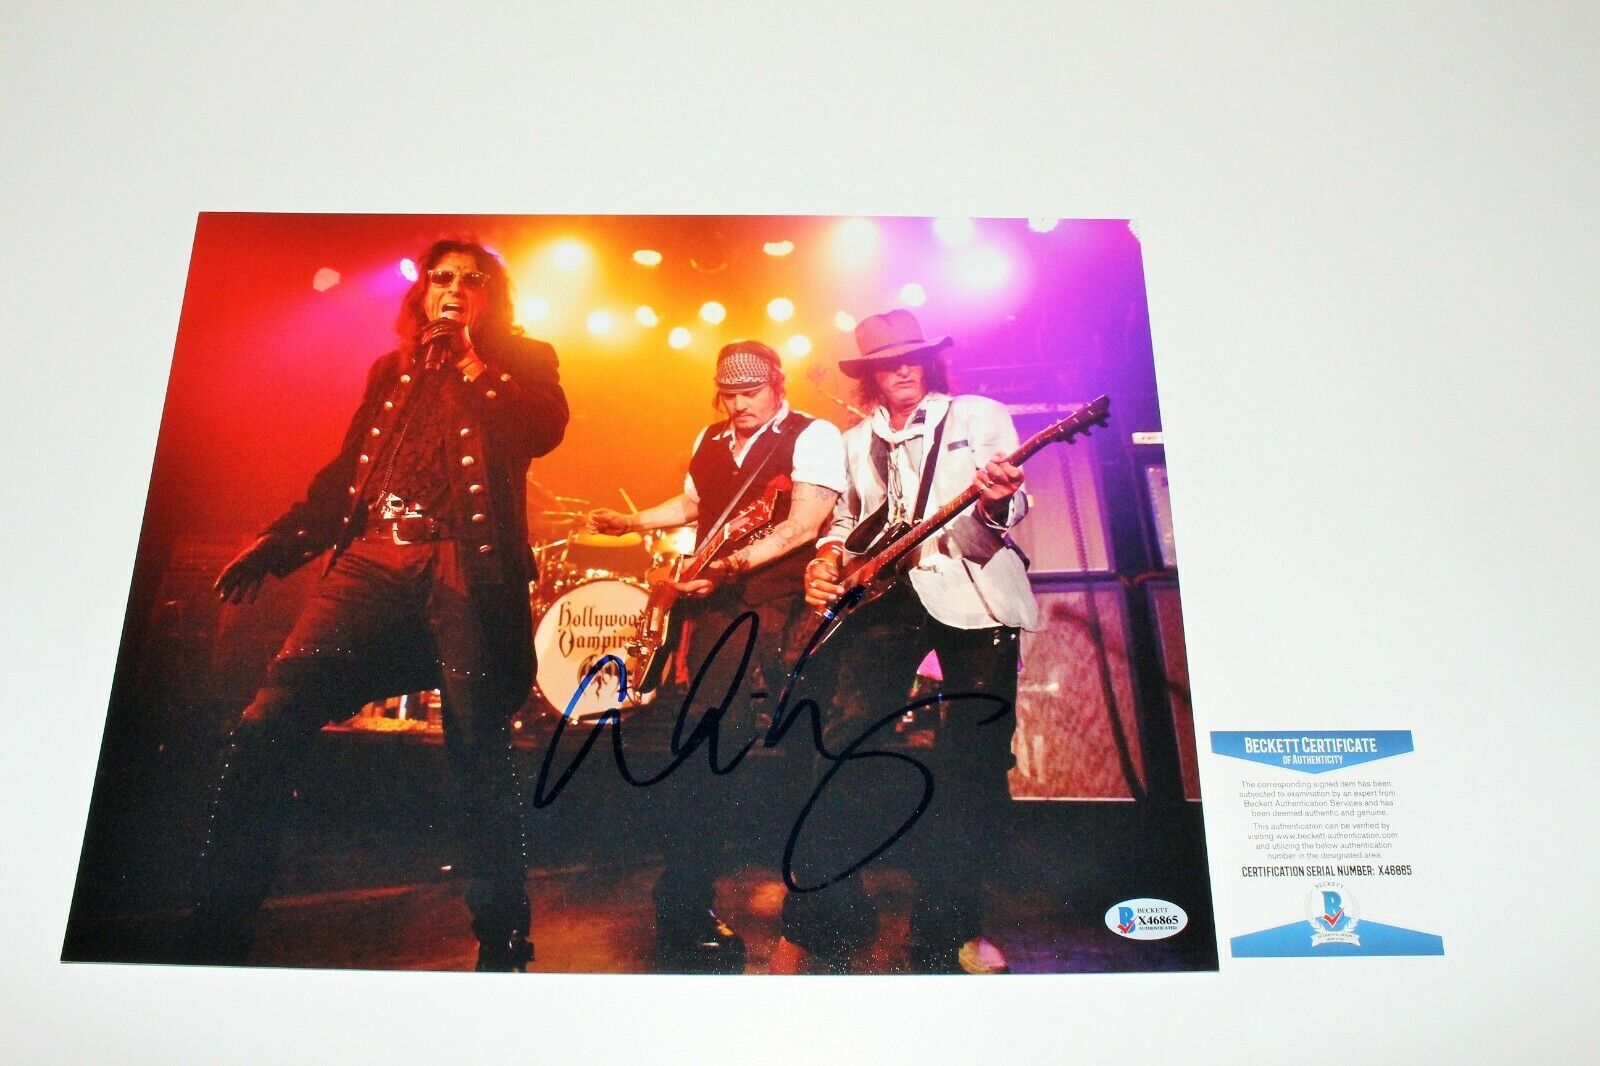 ALICE COOPER SIGNED HOLLYWOOD VAMPIRES 11x14 Photo Poster painting BECKETT COA SCHOOL'S OUT